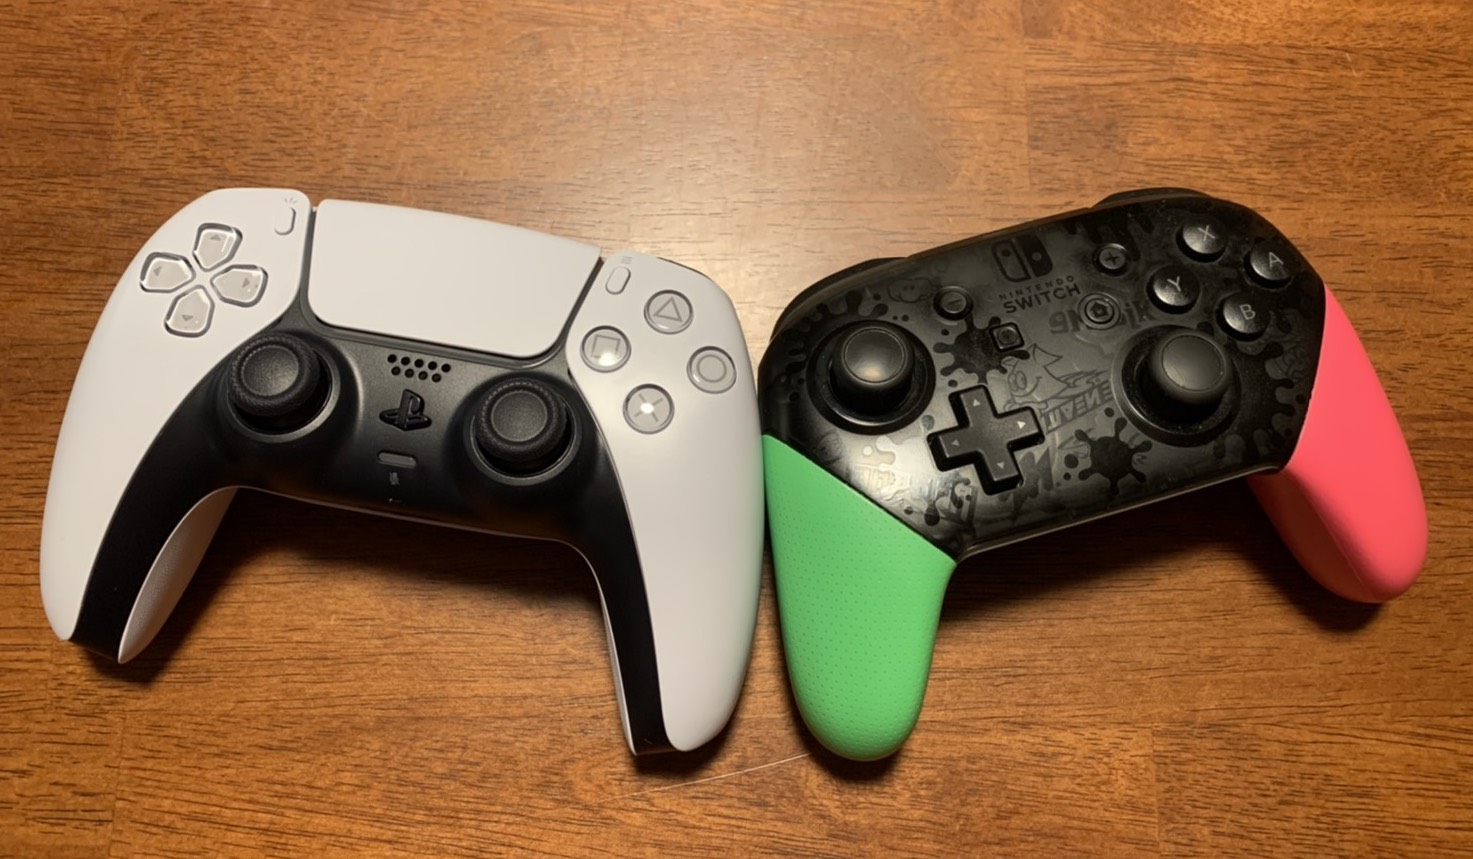 PS5 DualSense vs Xbox Gamepad: Which is the better controller for